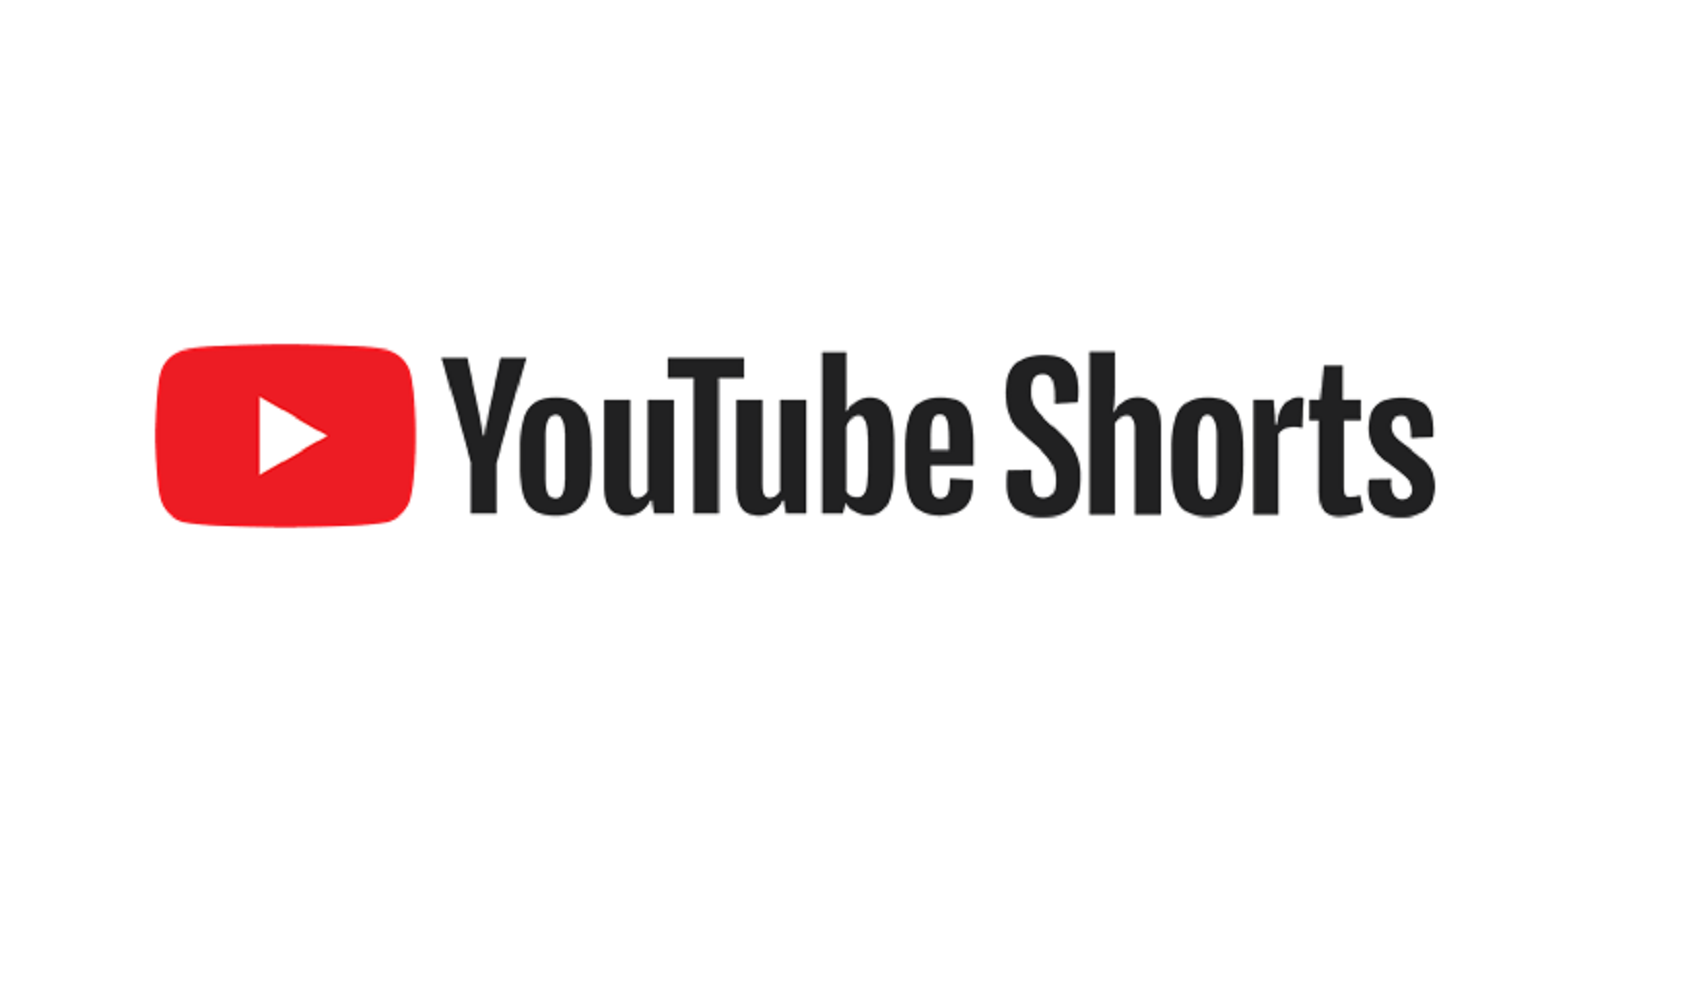 YouTube Launches Fund to Reward Short-Form Video Creation in MENA